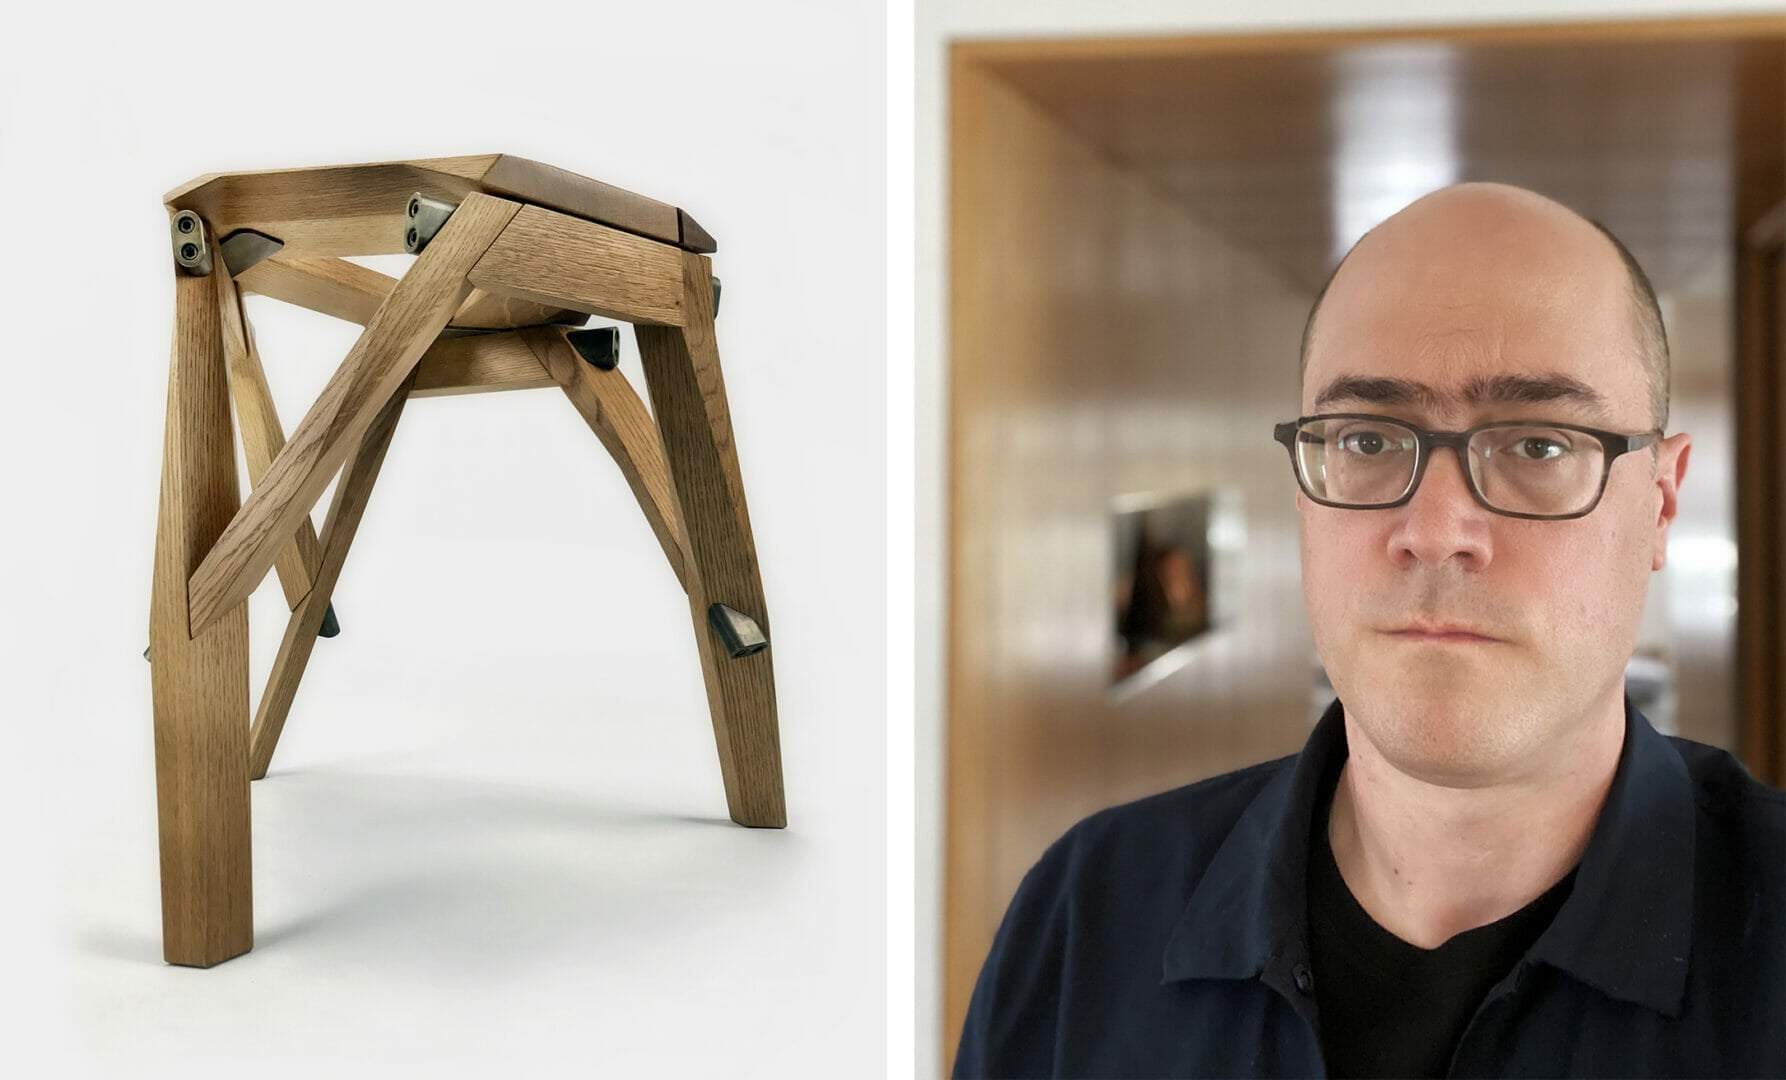 on left is a three-legged wood stool with metal hardware; on the right is a man in a black shirt with a shaved head and glasses